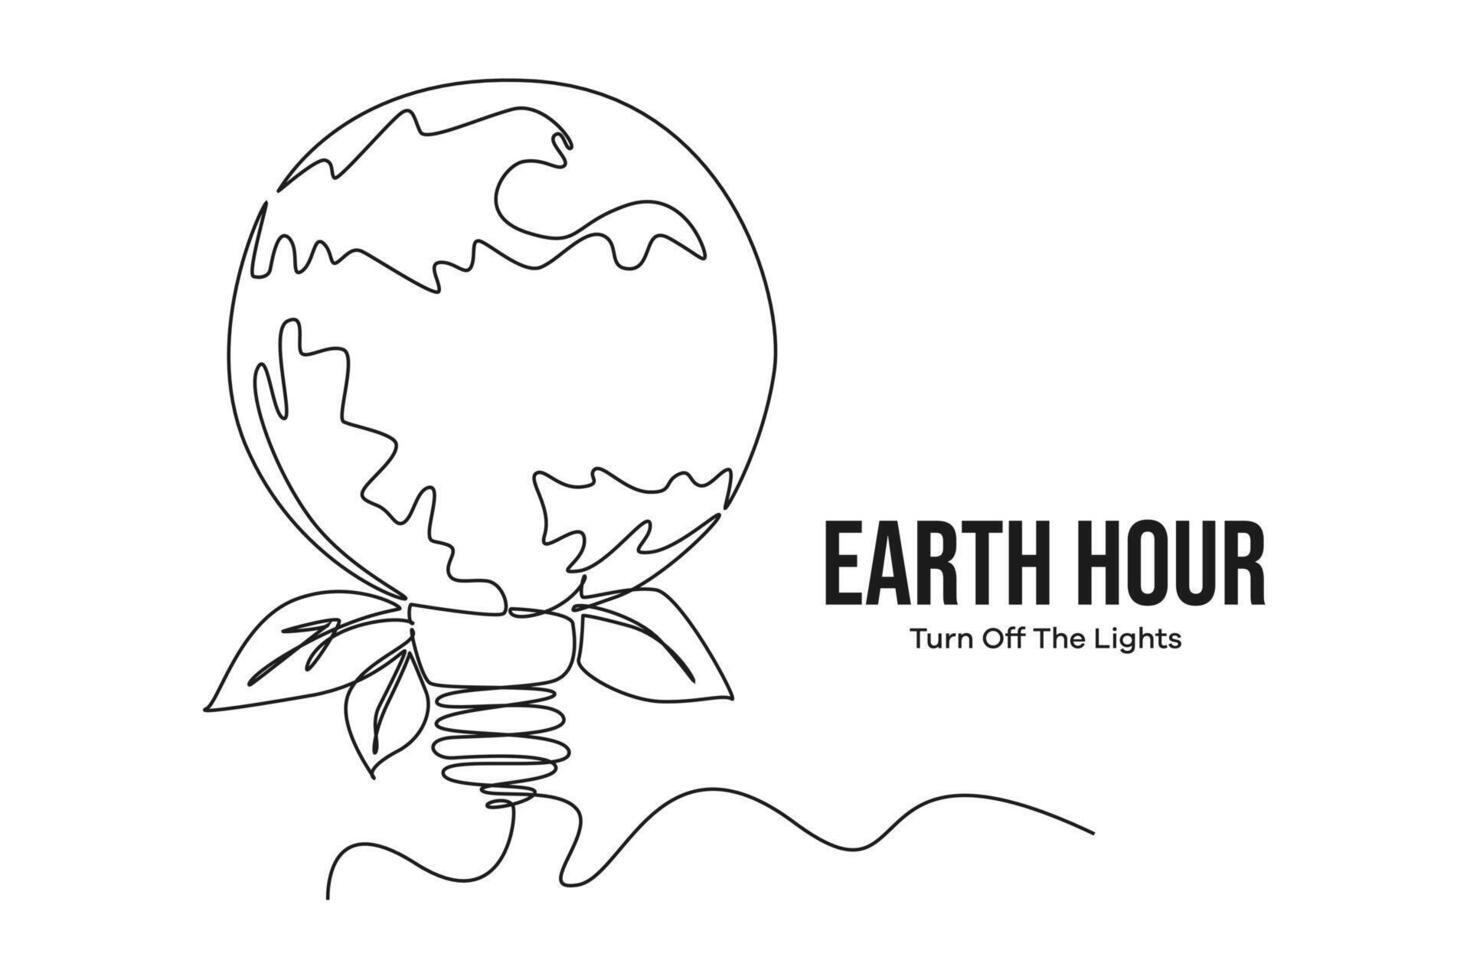 Continuous one line drawing earth hour day concept. Doodle vector illustration.